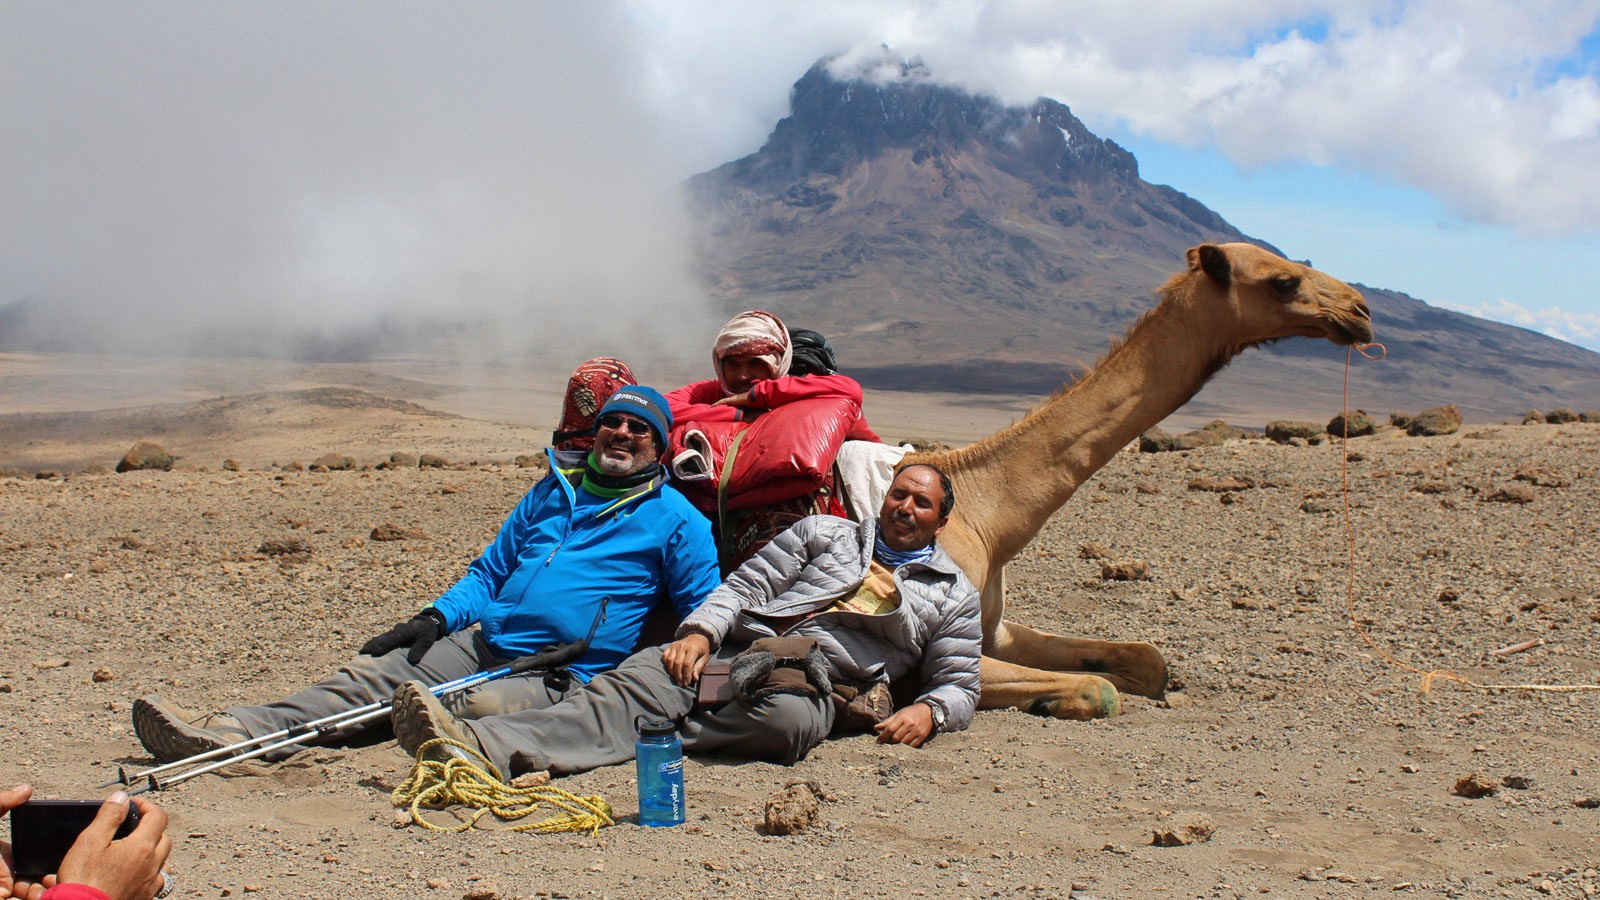 Climbers pose with camels on Kilimanjaro